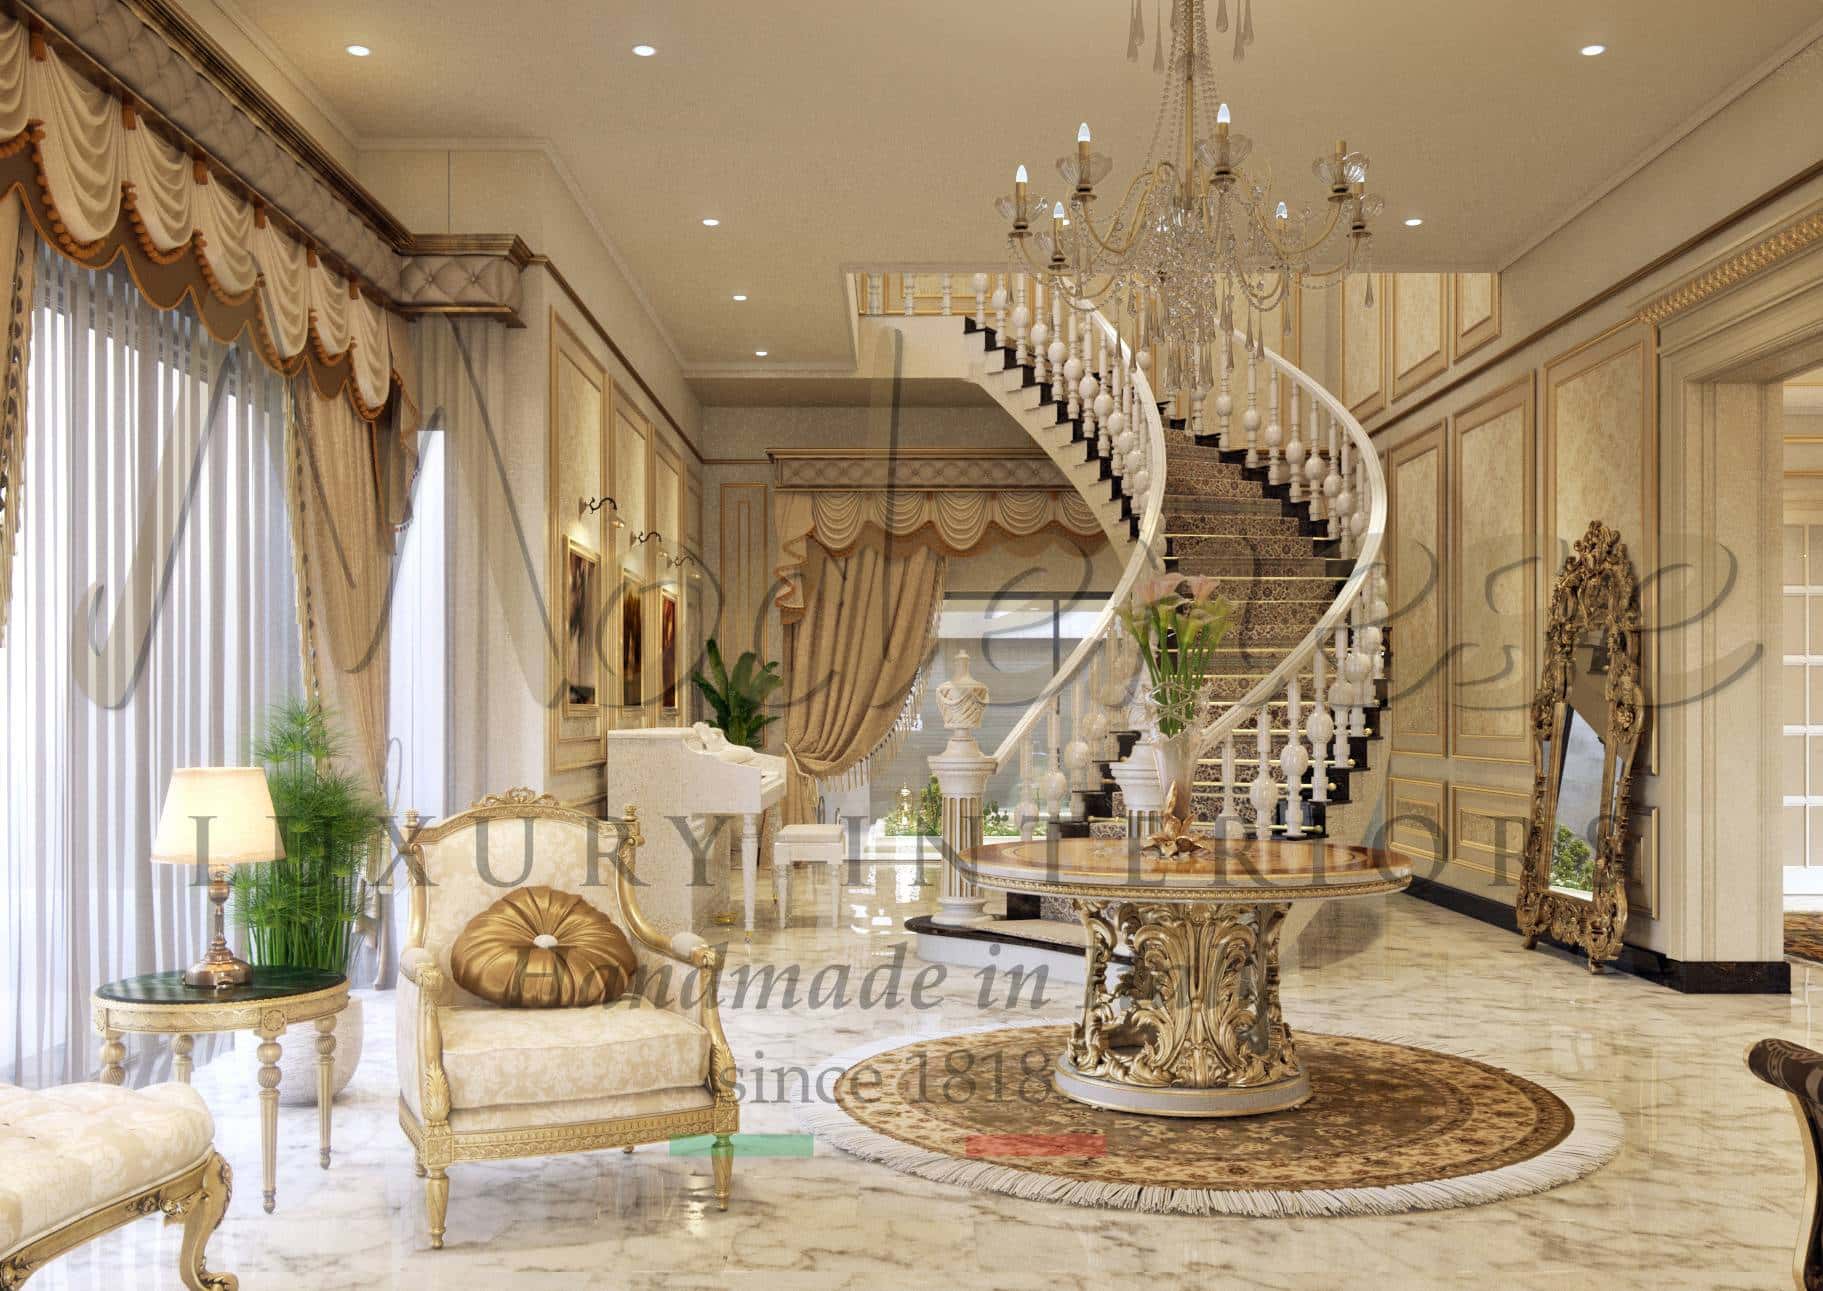 italian quality mansions and penthouses design project realization interior service decoration consultant penthouse royal luxury classic classy french baroque taste made in Italy top quality gold details opulent majestic residential home decoration furniture fit out